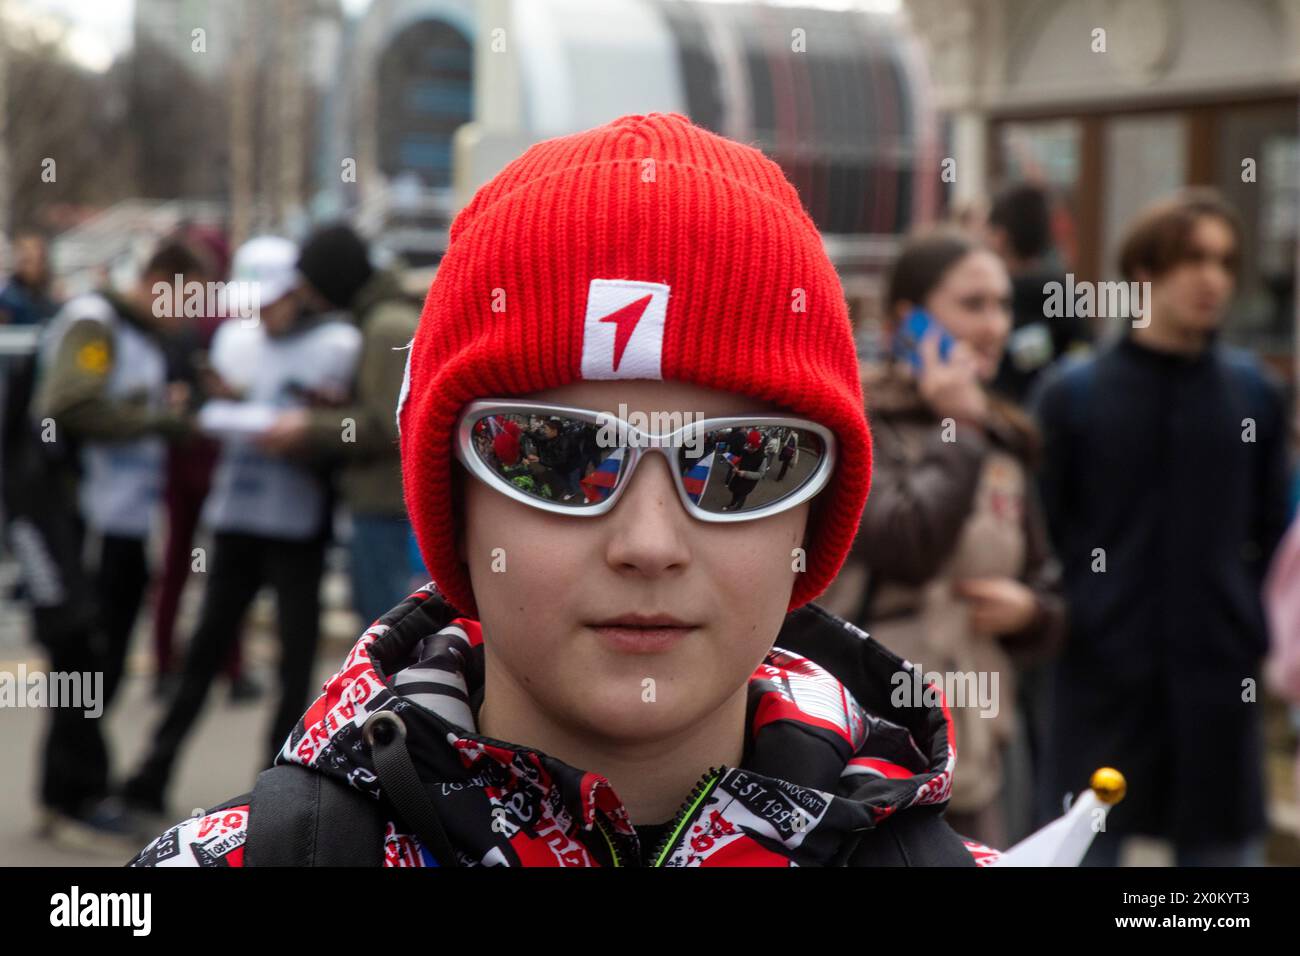 Moscow, Russia. 12th of April, 2024. A member of the Movement of the First takes part of celebration Cosmonautics Day during the Russia Expo international forum and exhibition at the VDNKh Exhibition Centre in Moscow, Russia. Credit: Nikolay Vinokurov/Alamy Live News Stock Photo